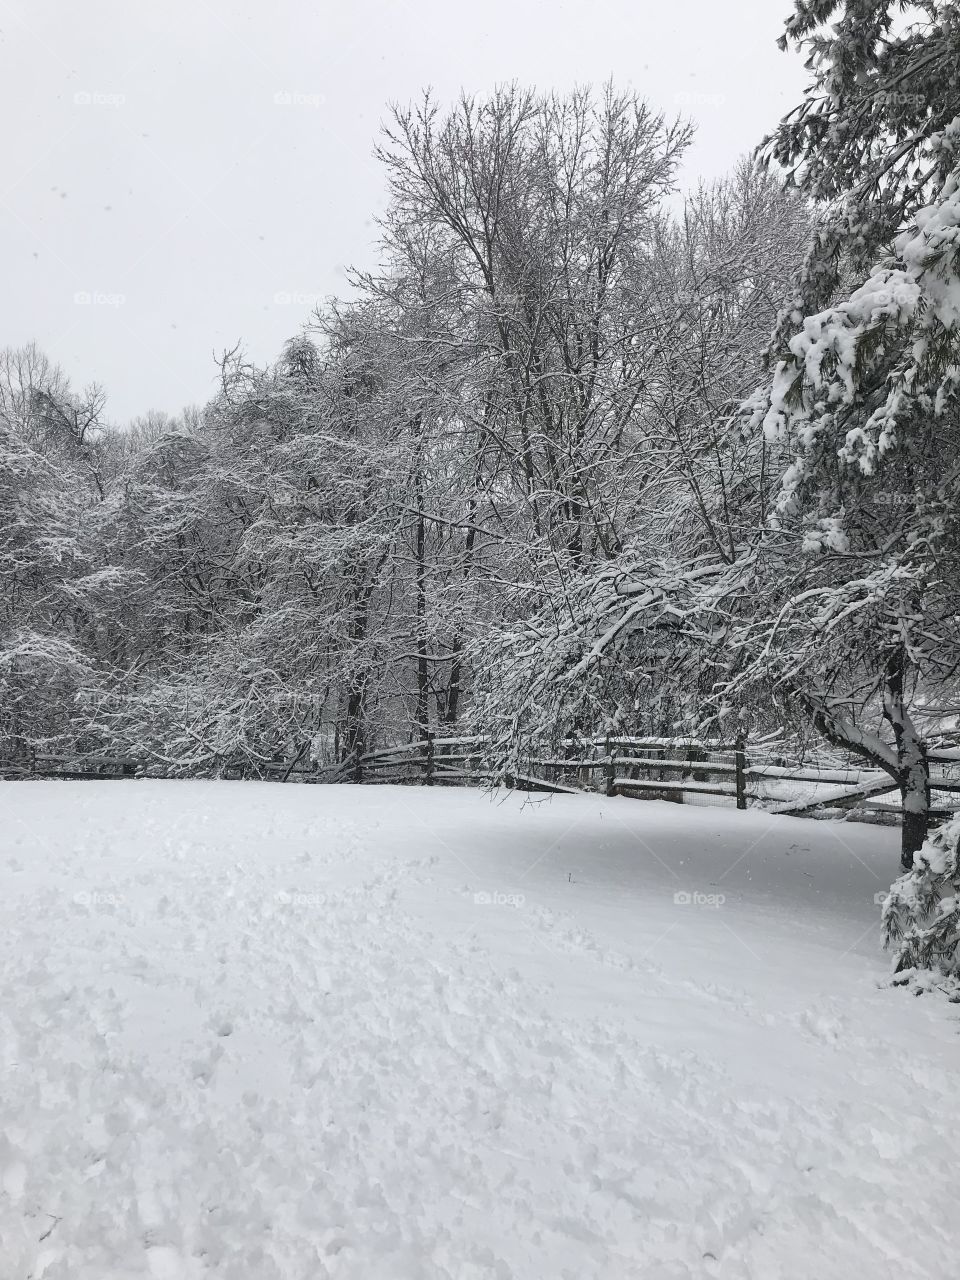 Snow storm in March 2018